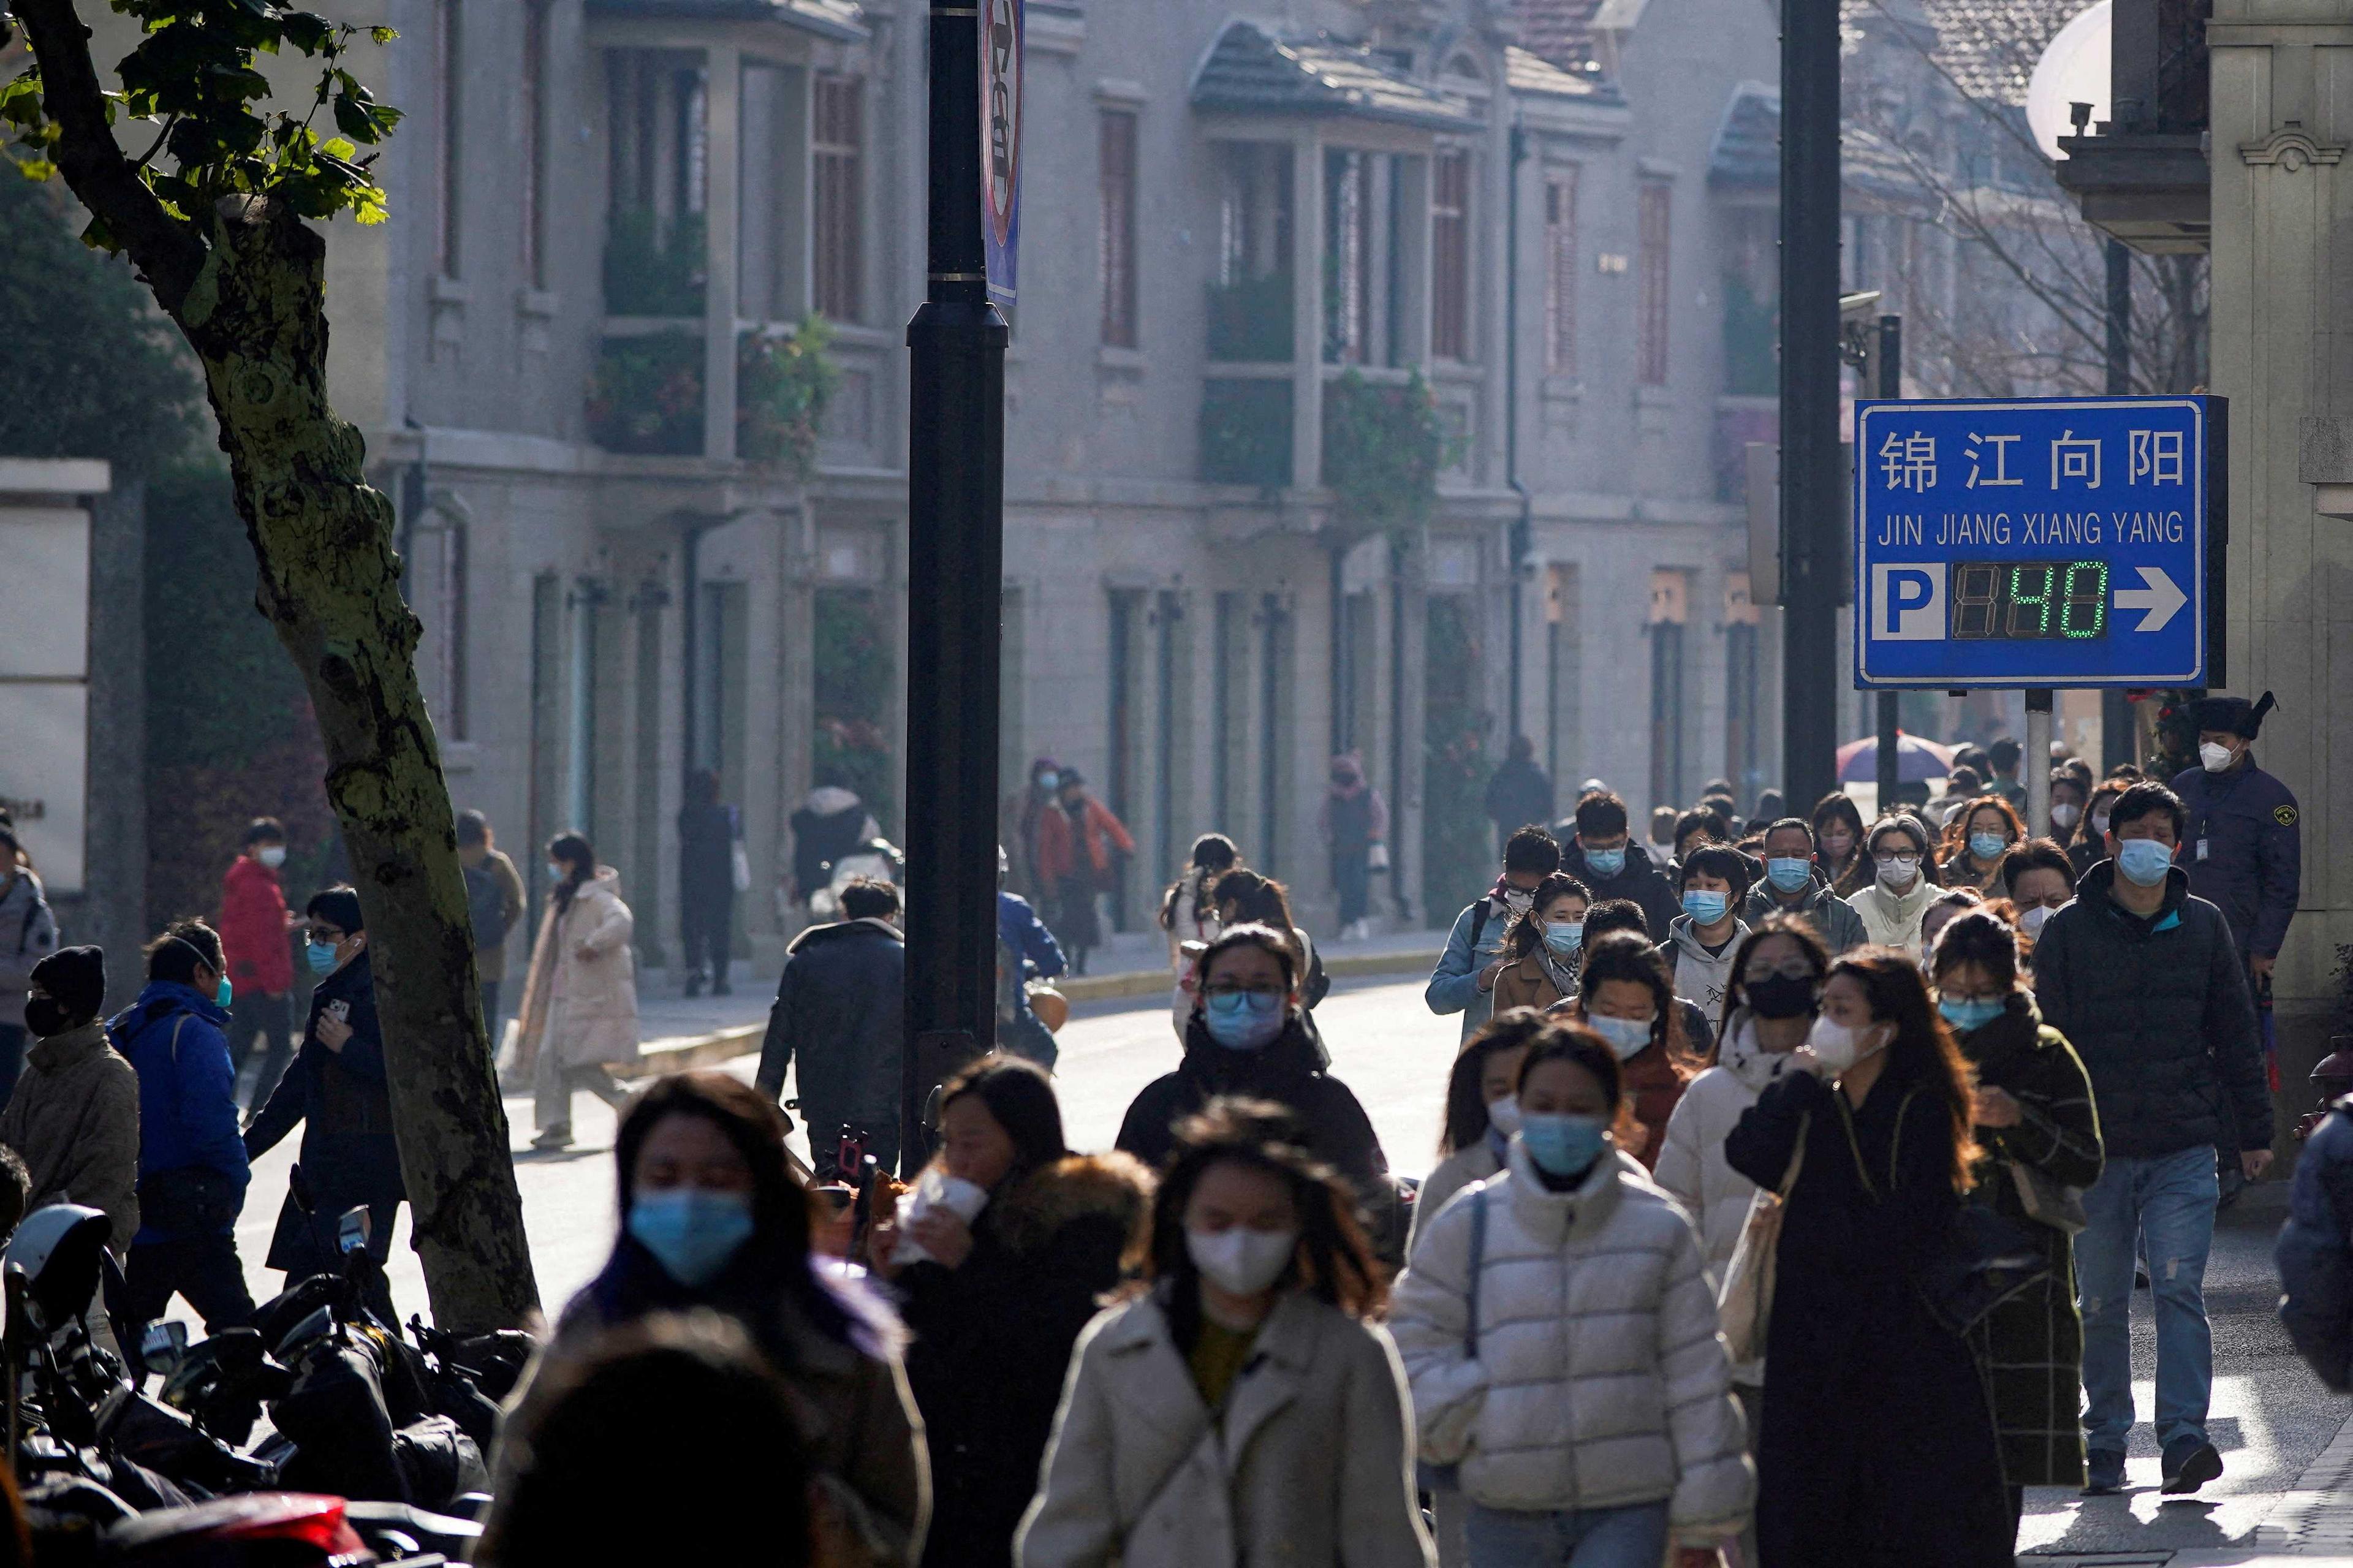 People wearing face masks walk on a street, as Covid-19 outbreaks continue in Shanghai, China, Dec 13, 2022. Photo: Reuters